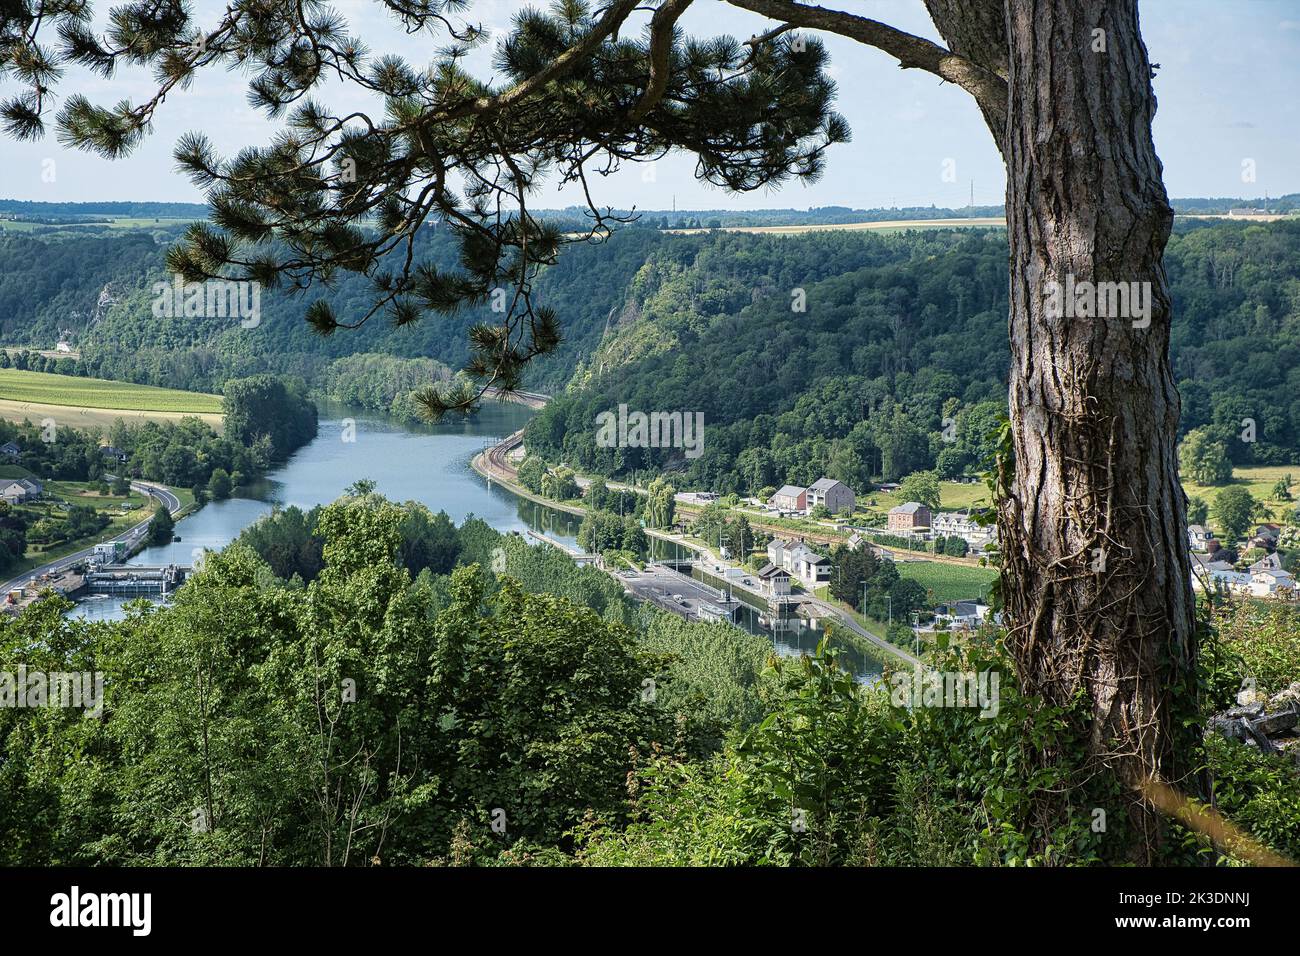 A high-angle shot of Poilvache castle precinct with a lake and forested hills, blue sky background Stock Photo